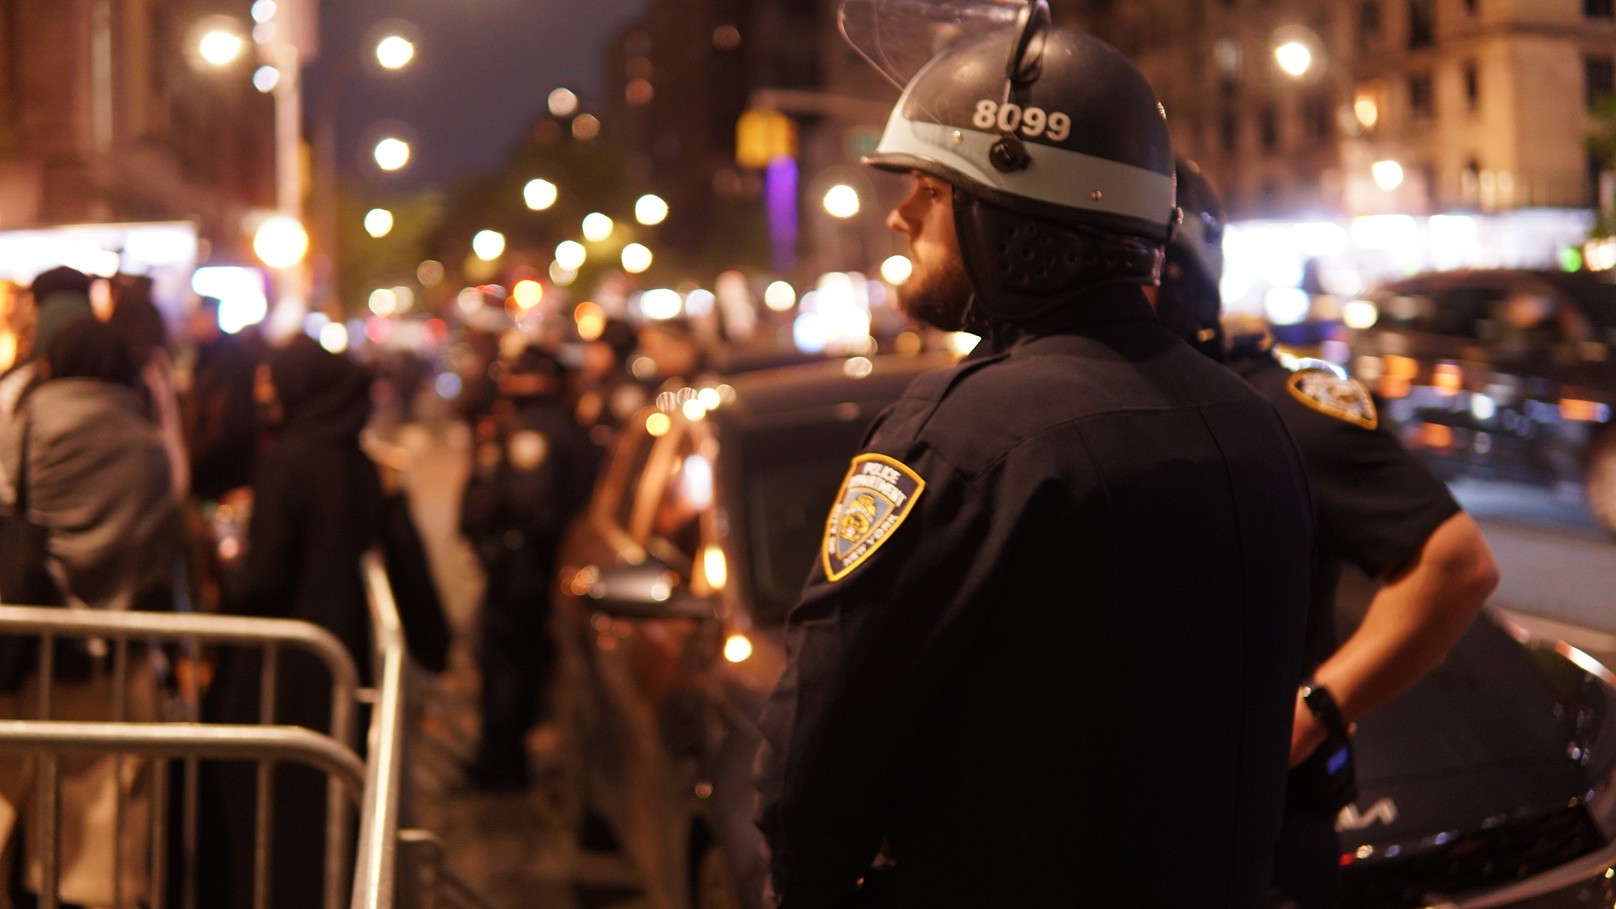 The NYPD have been a regular fixture outside Columbia University over the past week (Azad Essa/MEE)